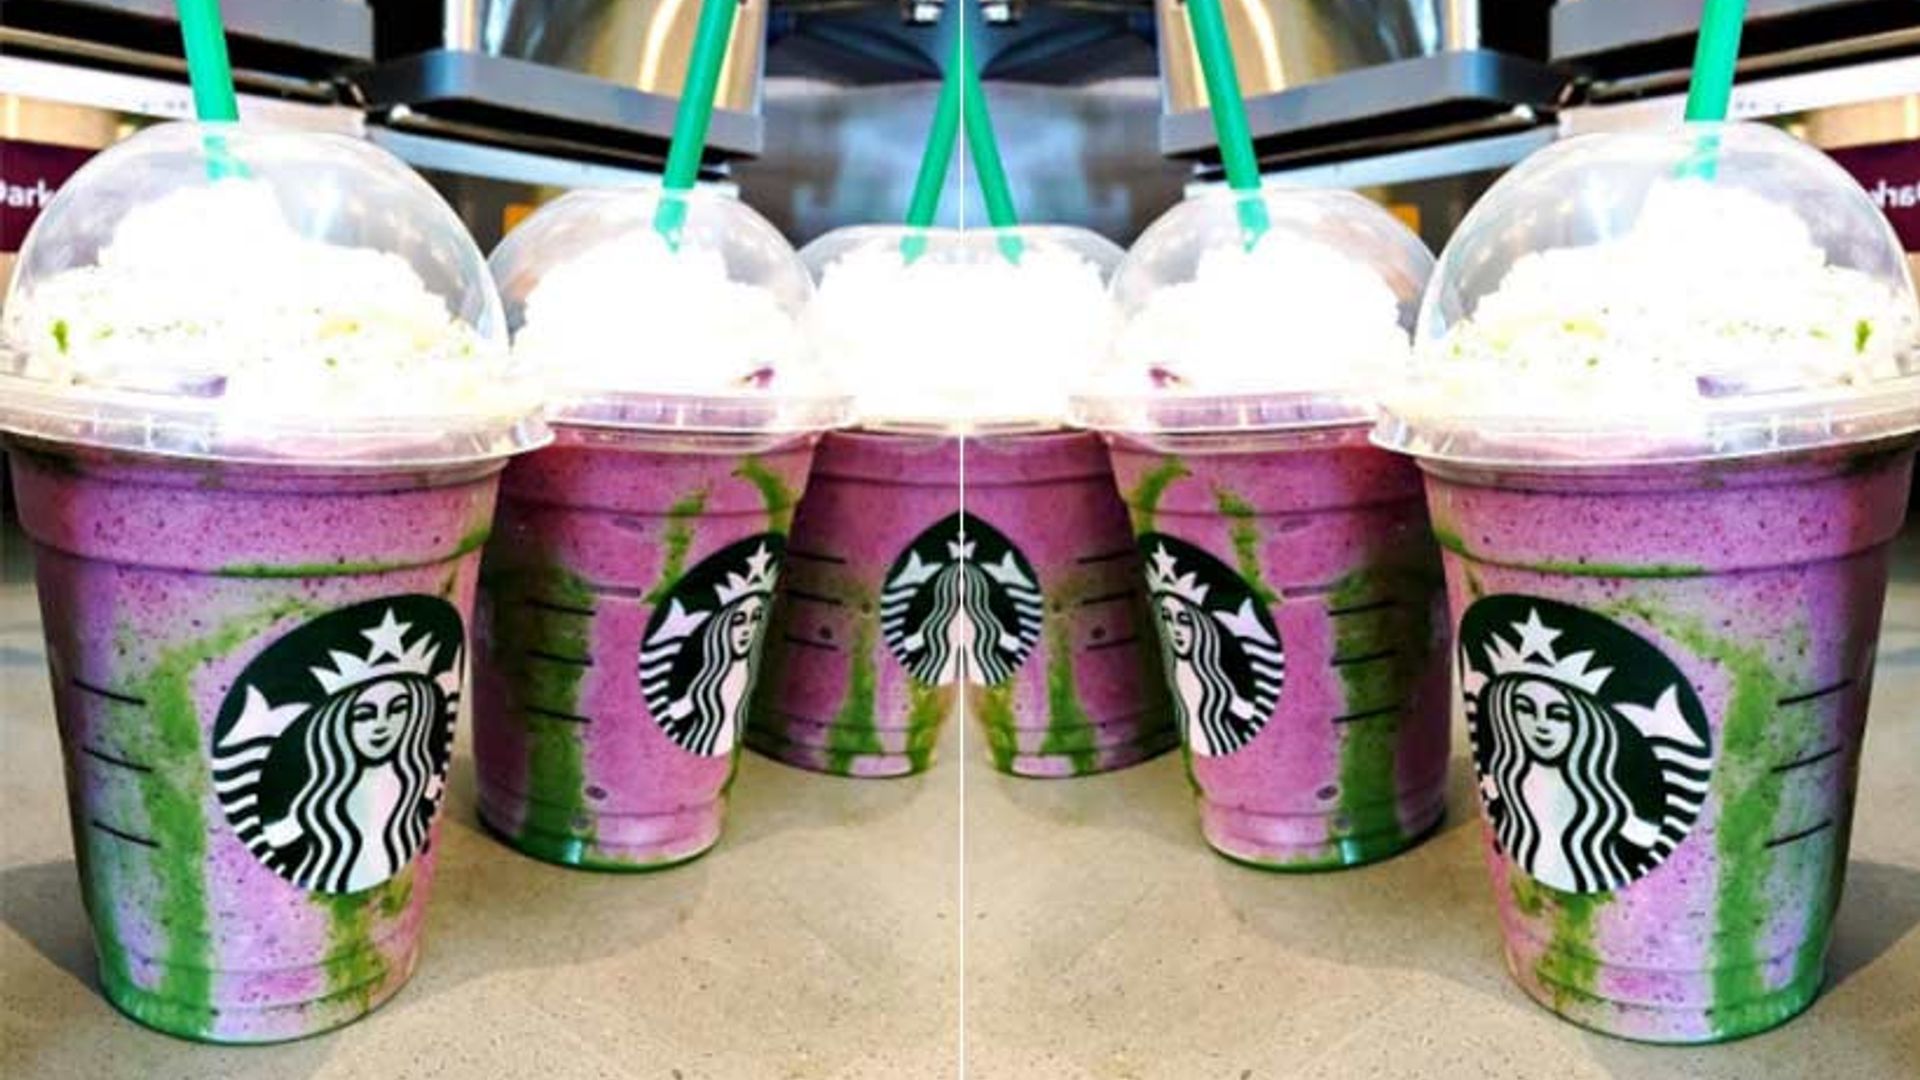 A Mermaid Frappuccino is the latest magical drink to arrive at Starbucks